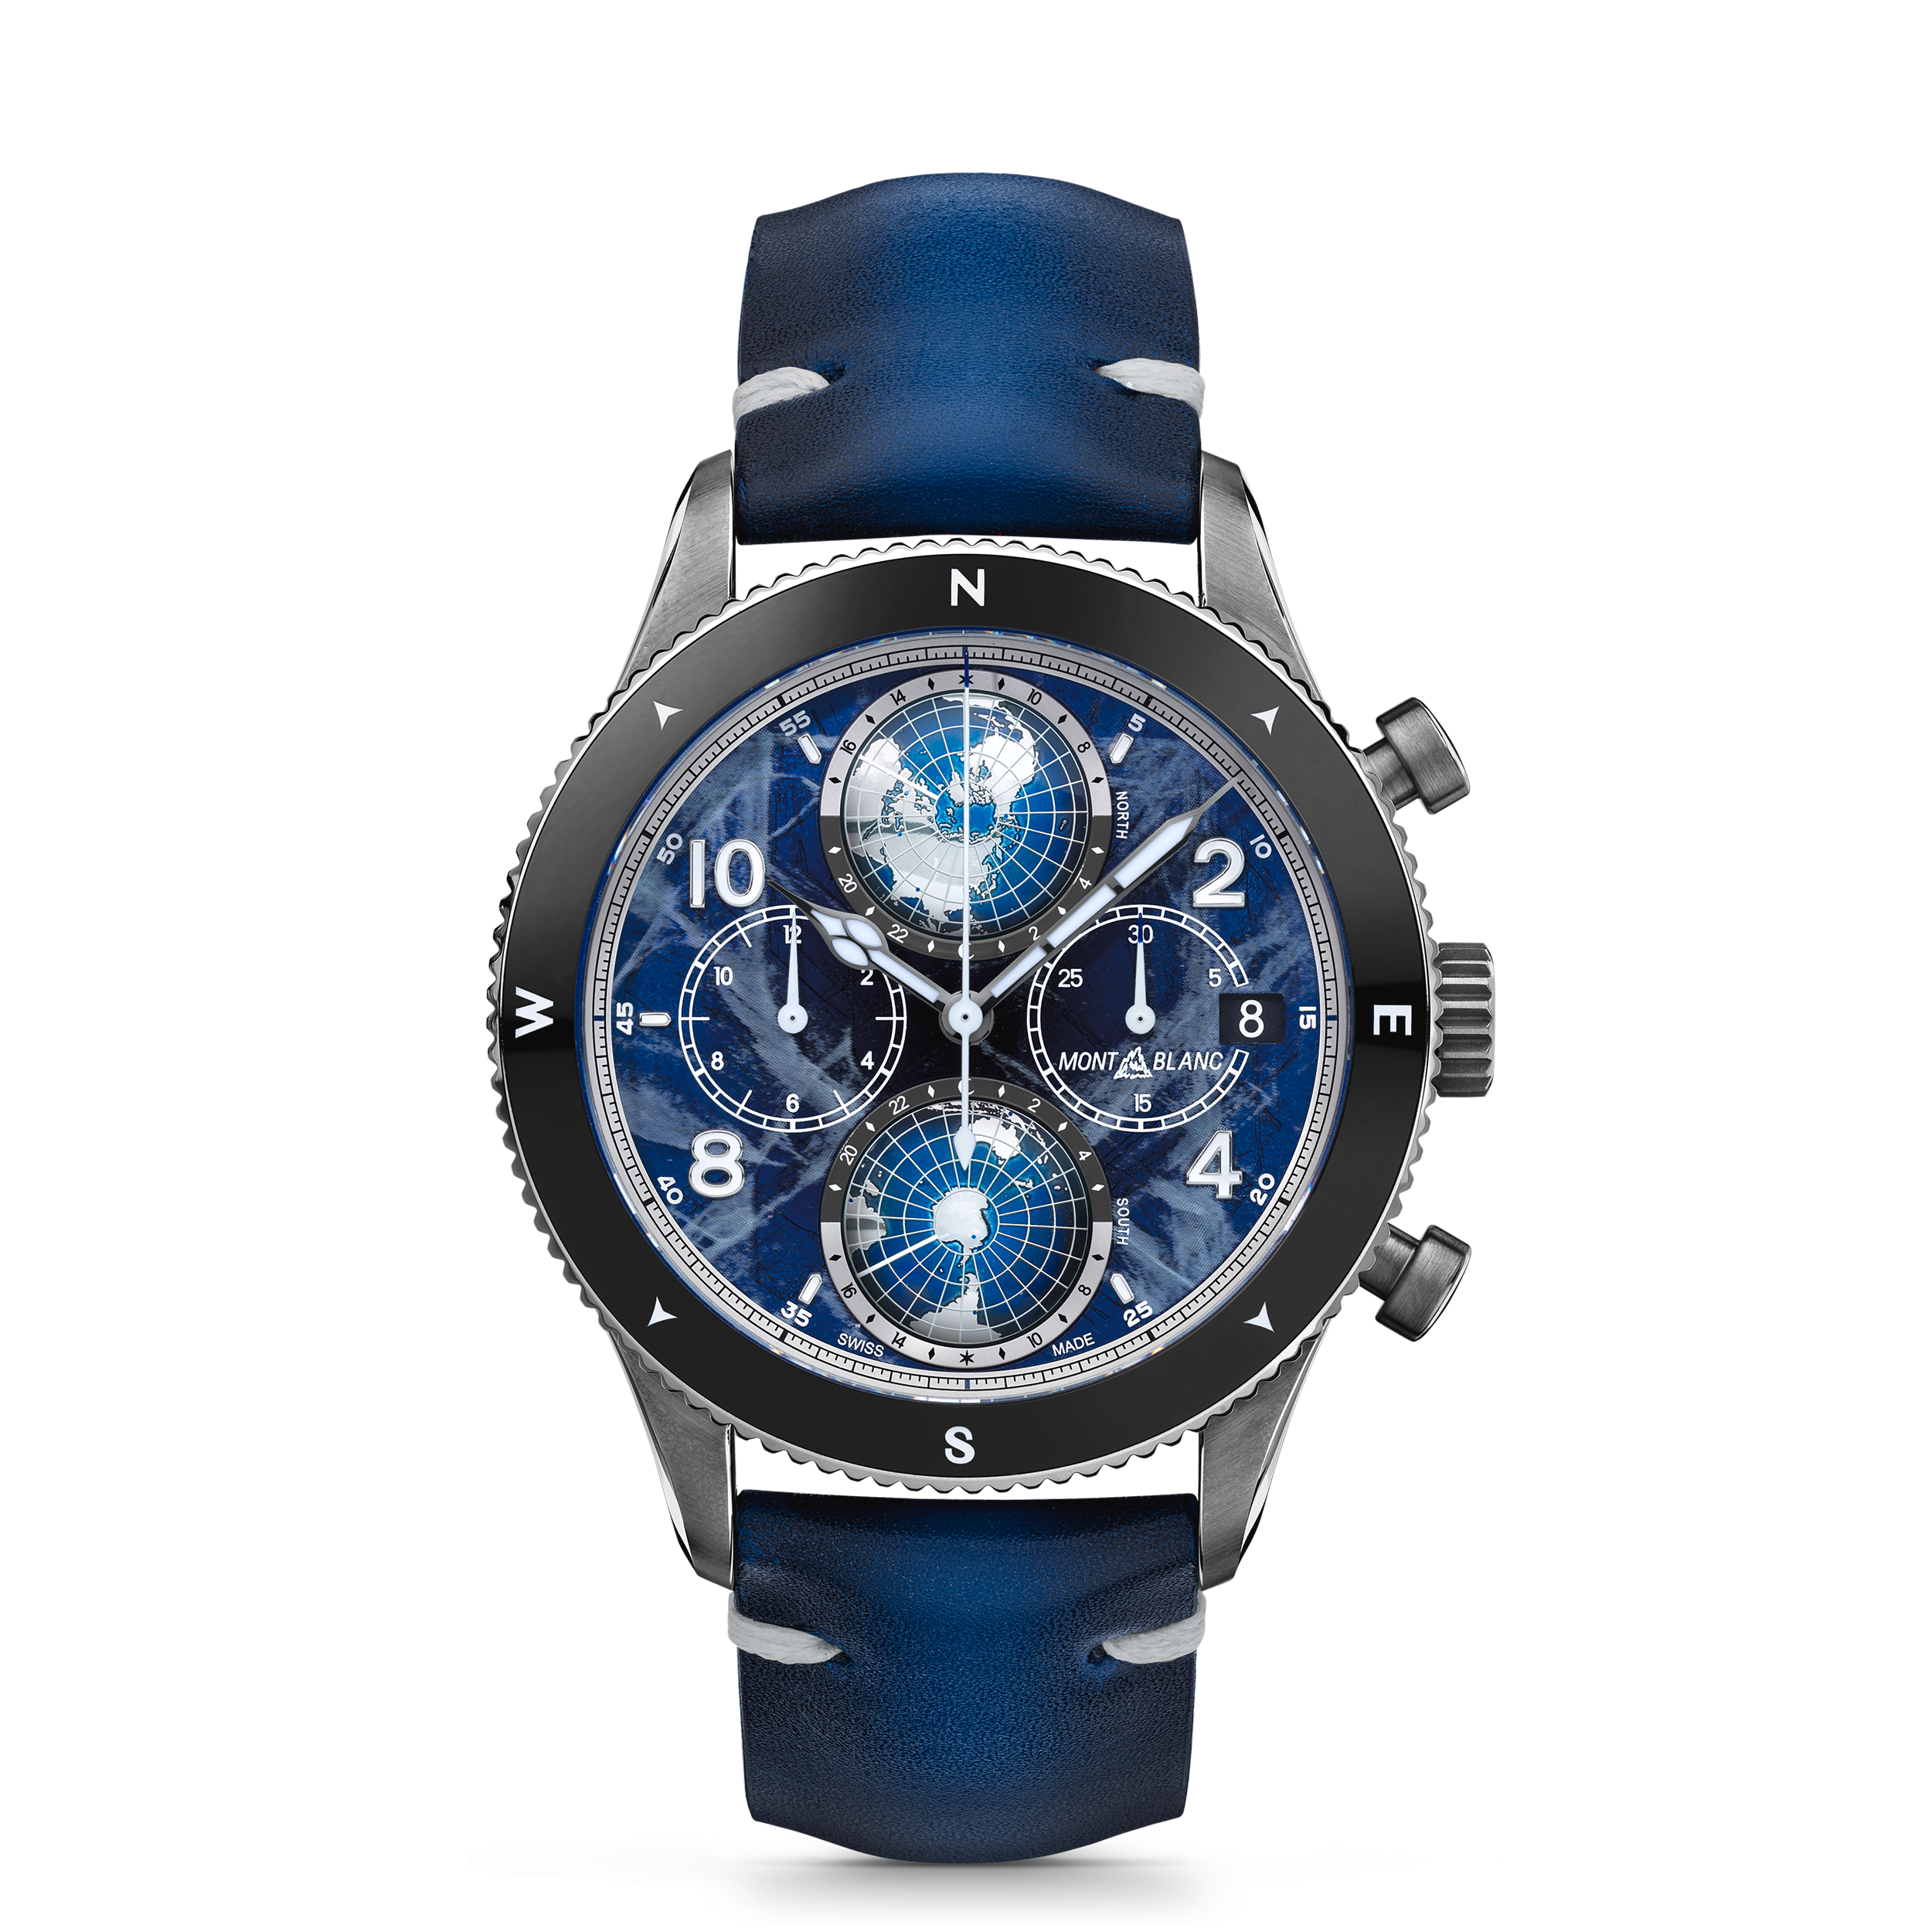 Montblanc 1858 Geosphere Chronograph 0 Oxygen Limited Edition - 290 pieces